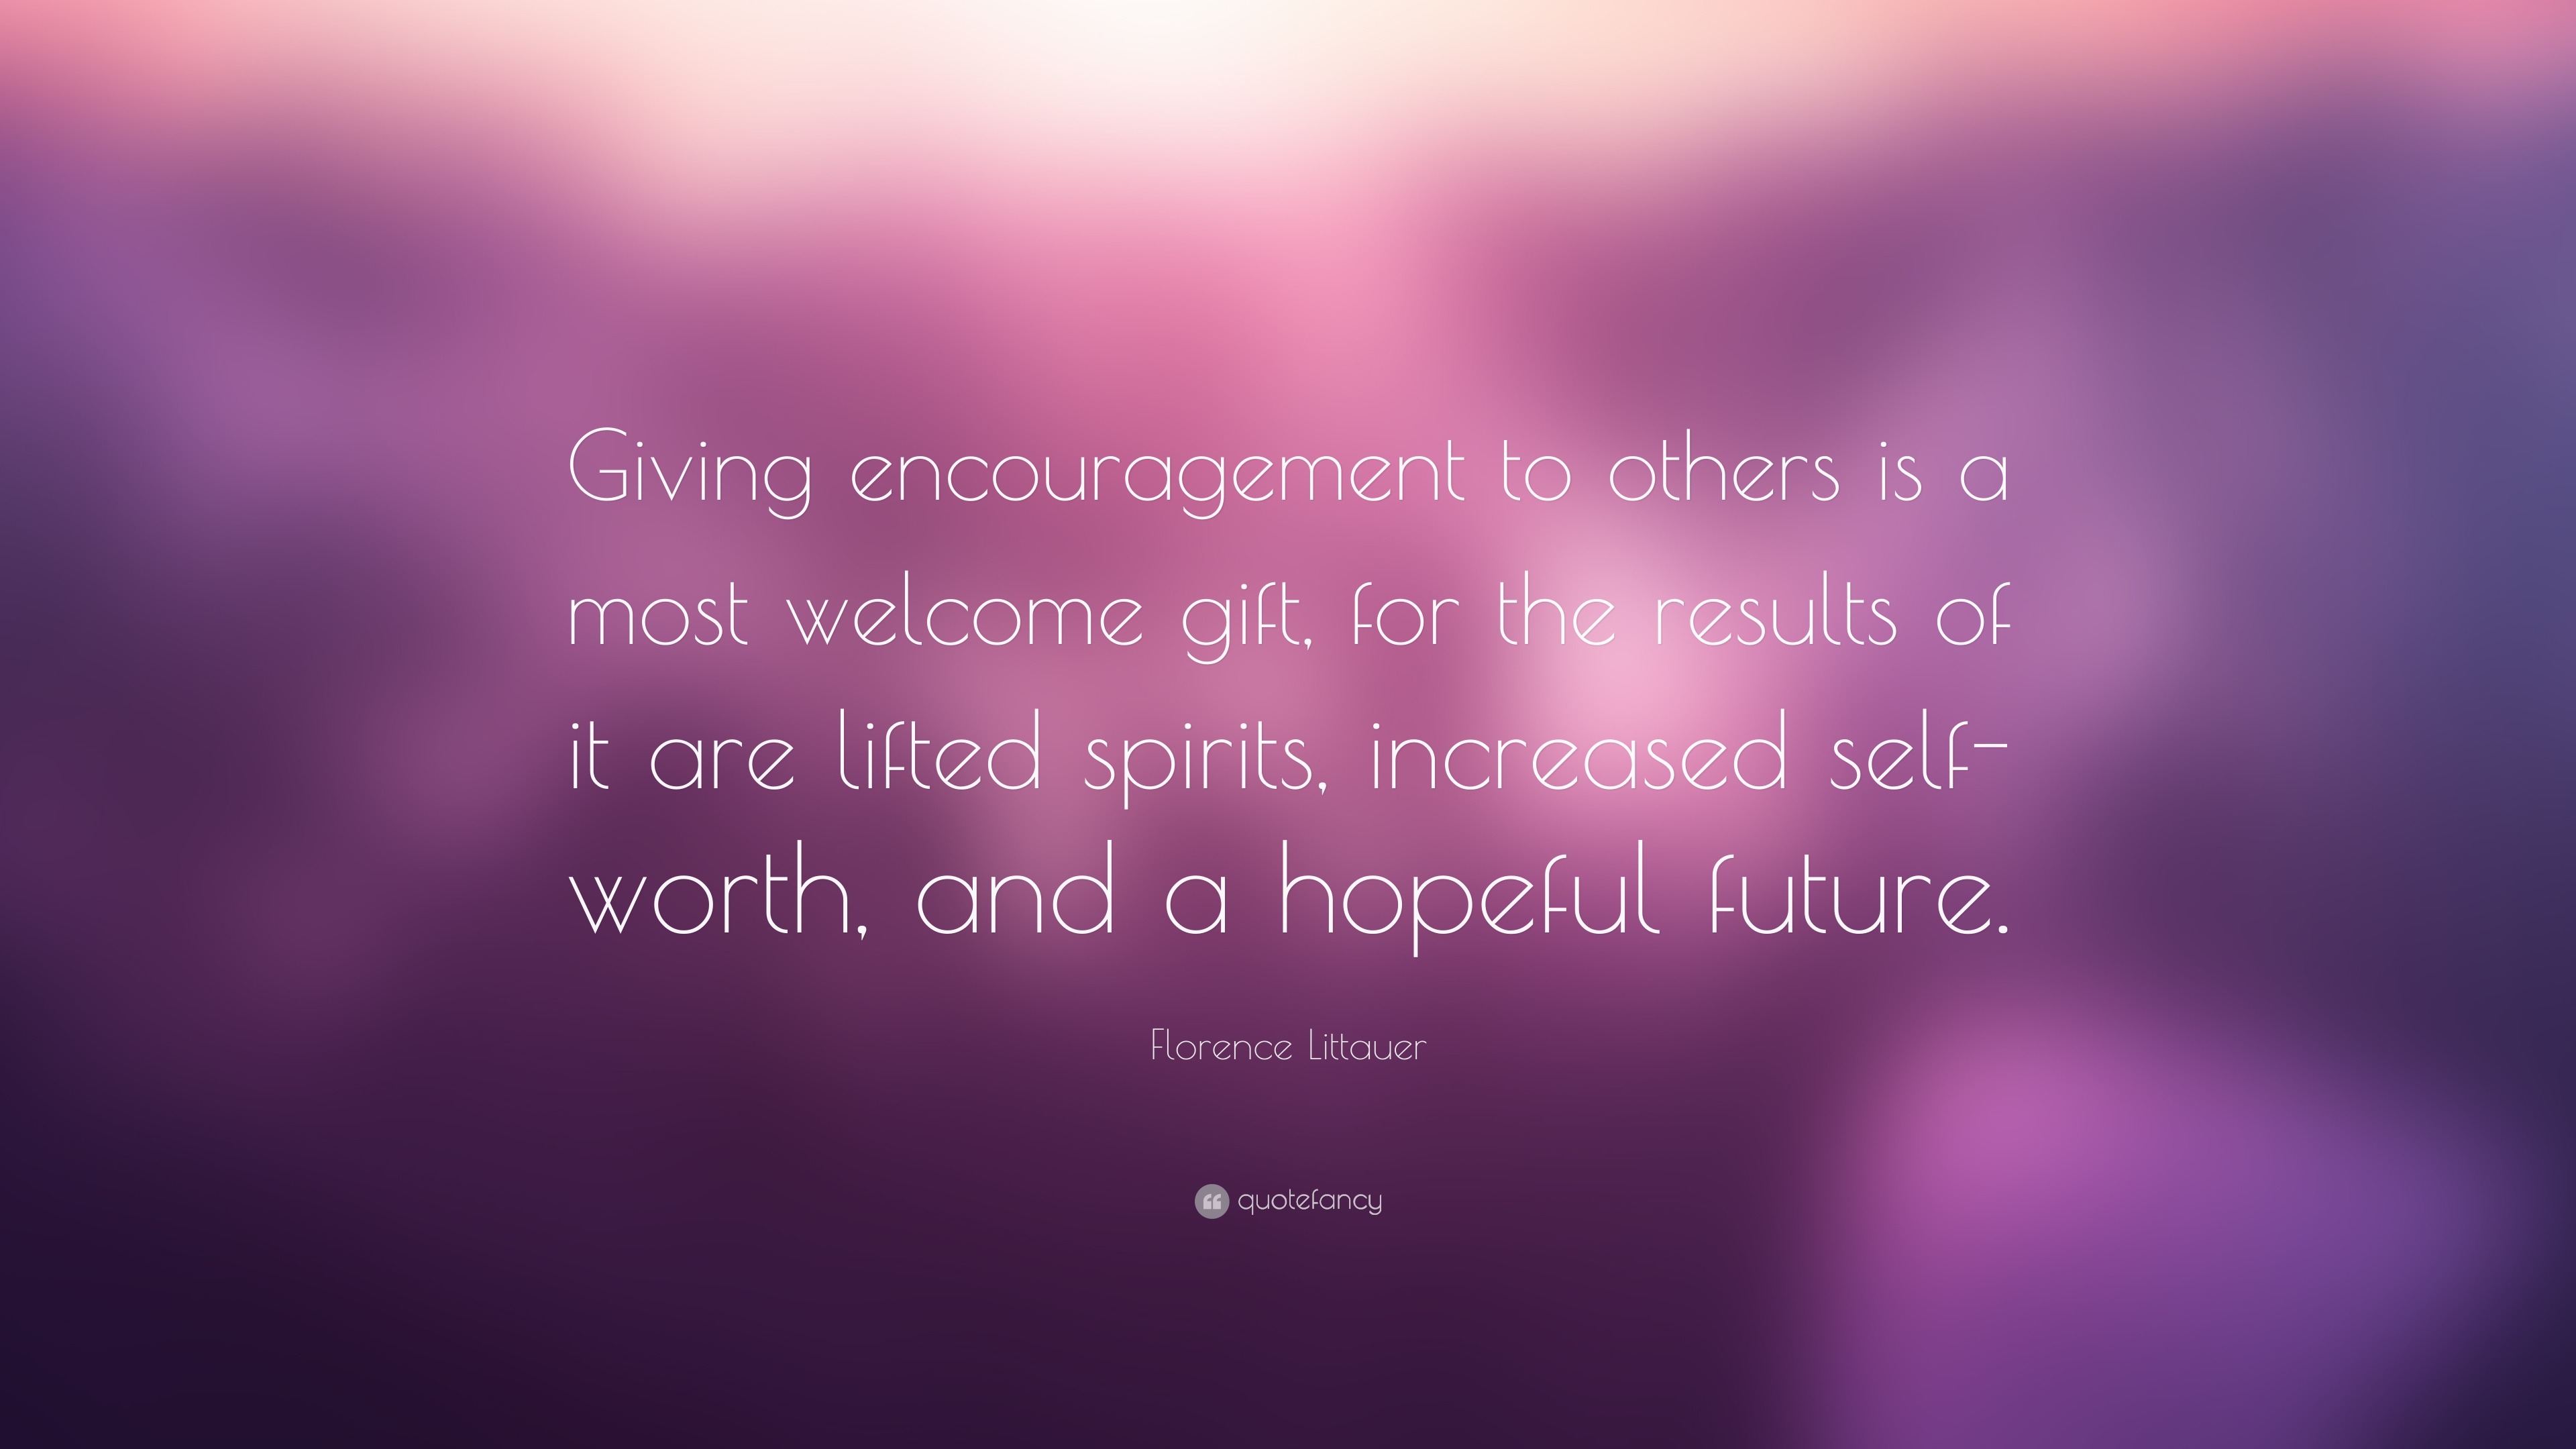 Florence Littauer Quote: “Giving encouragement to others is a most ...